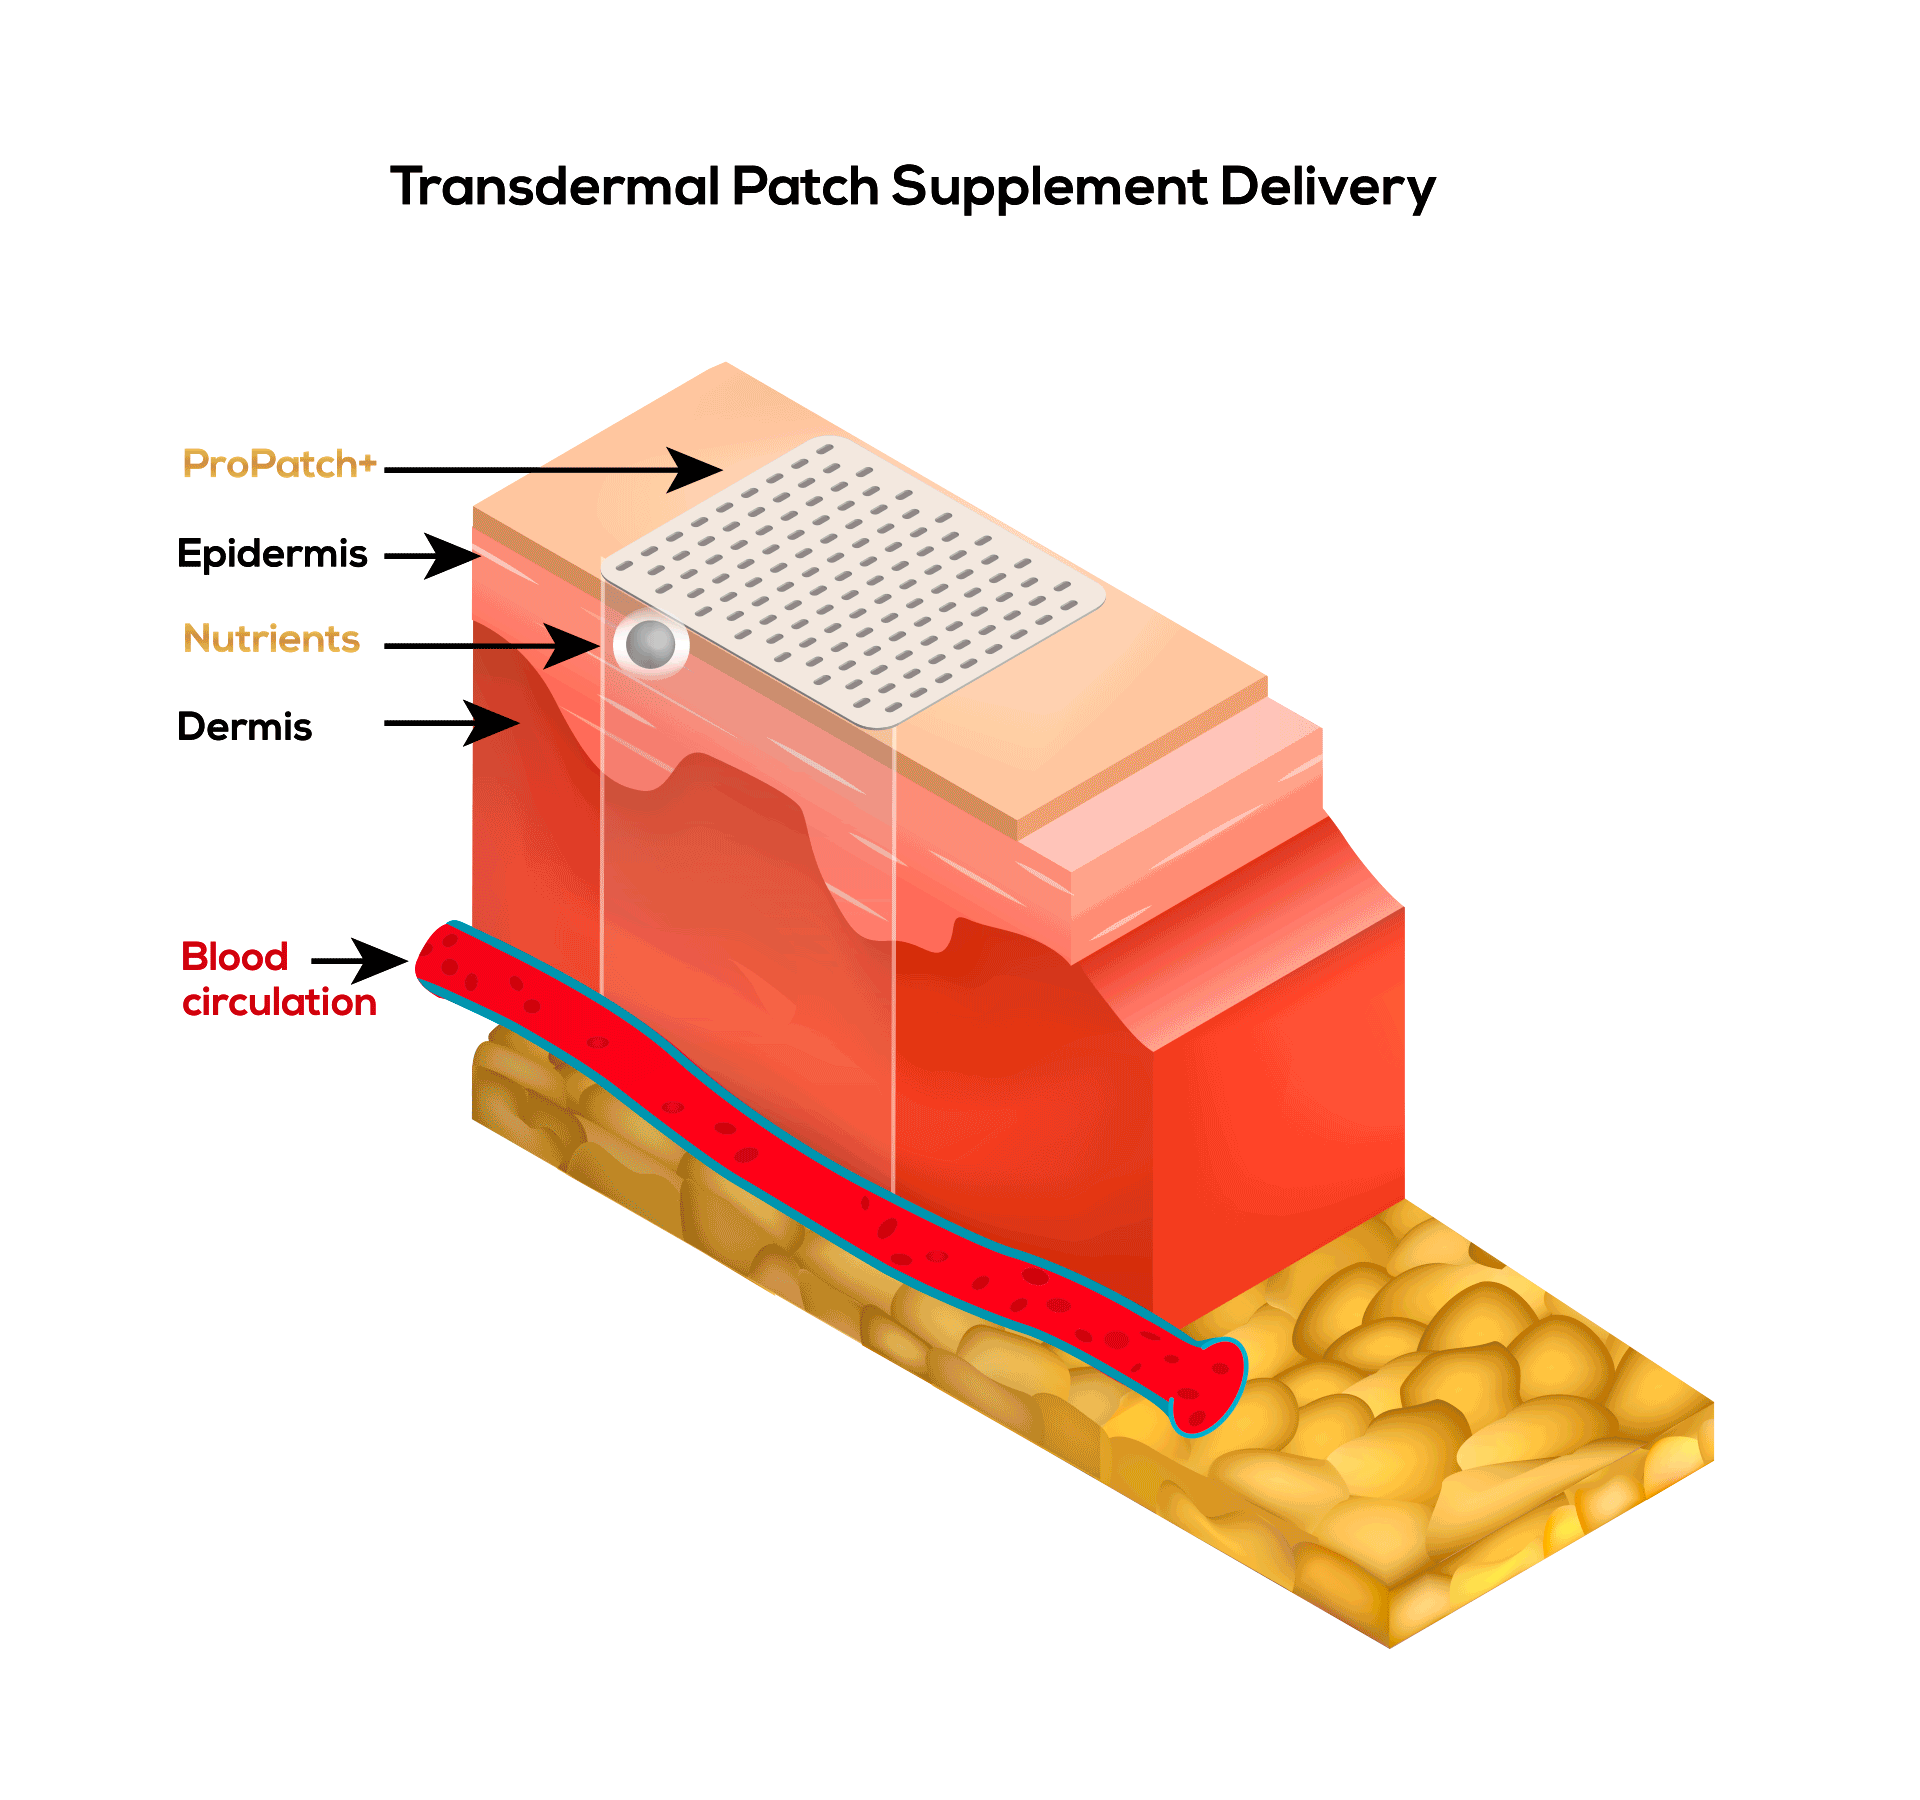 Transdermal Patch Supplement Delivery